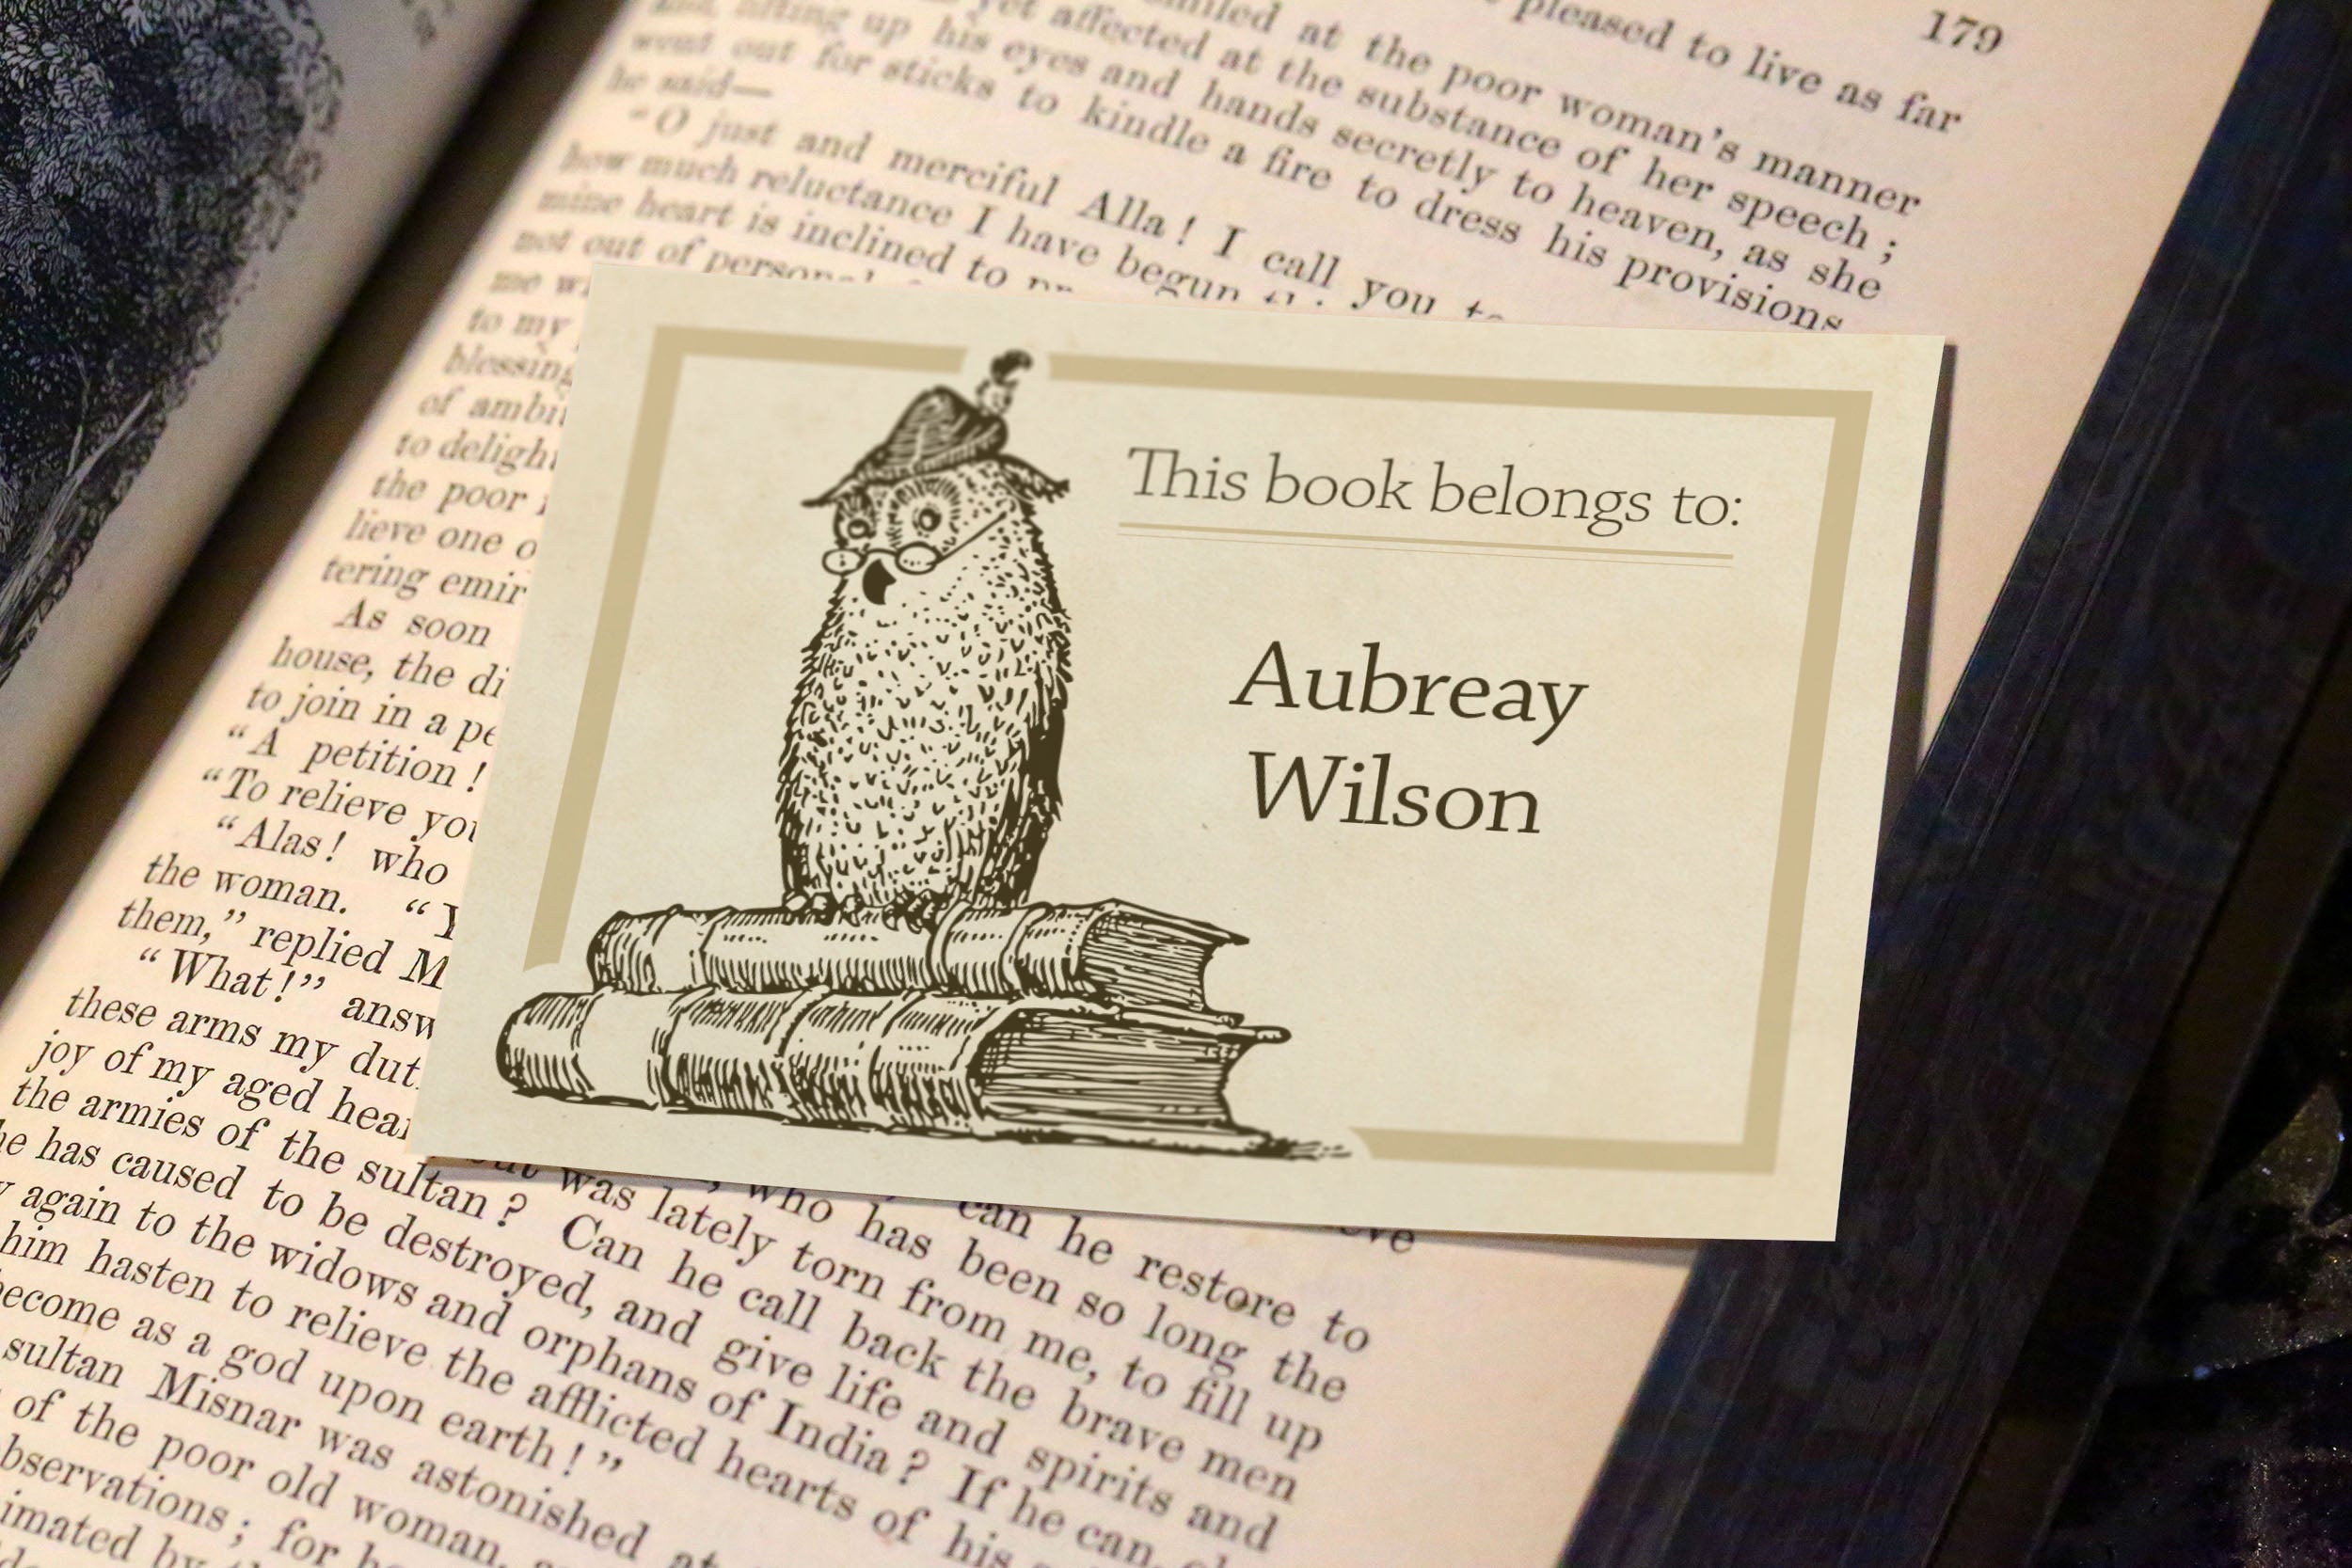 Owl With Feather In His Cap, Personalized Ex-Libris Bookplates, Crafted on Traditional Gummed Paper, 3.25in x 2.5in, Set of 30